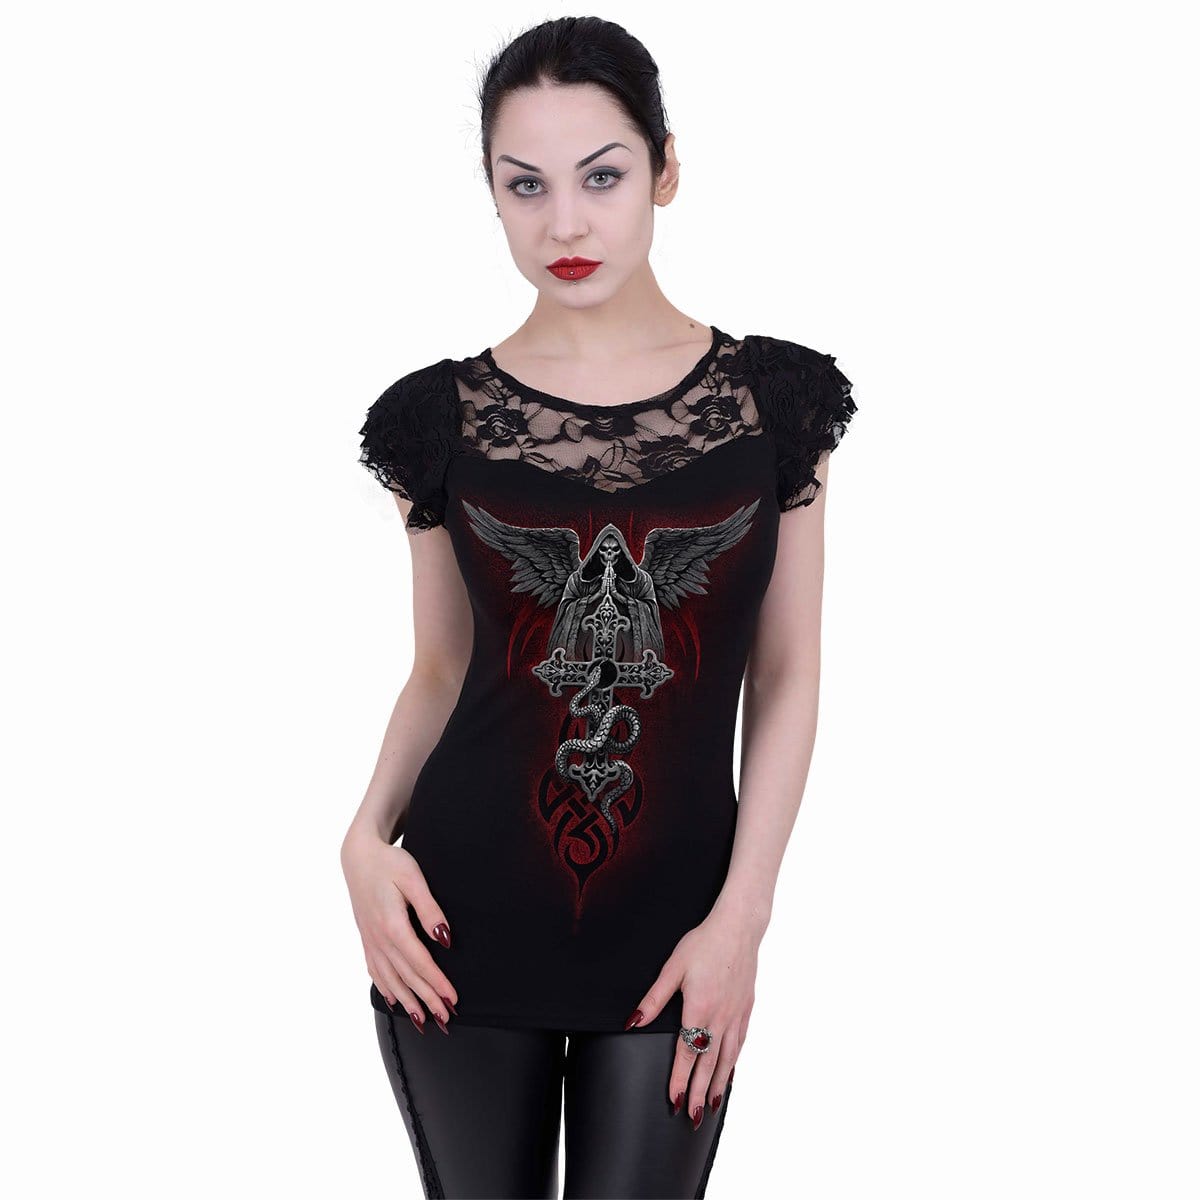 THE DEAD - Lace Layered Cap Sleeve Top Black - Spiral USA